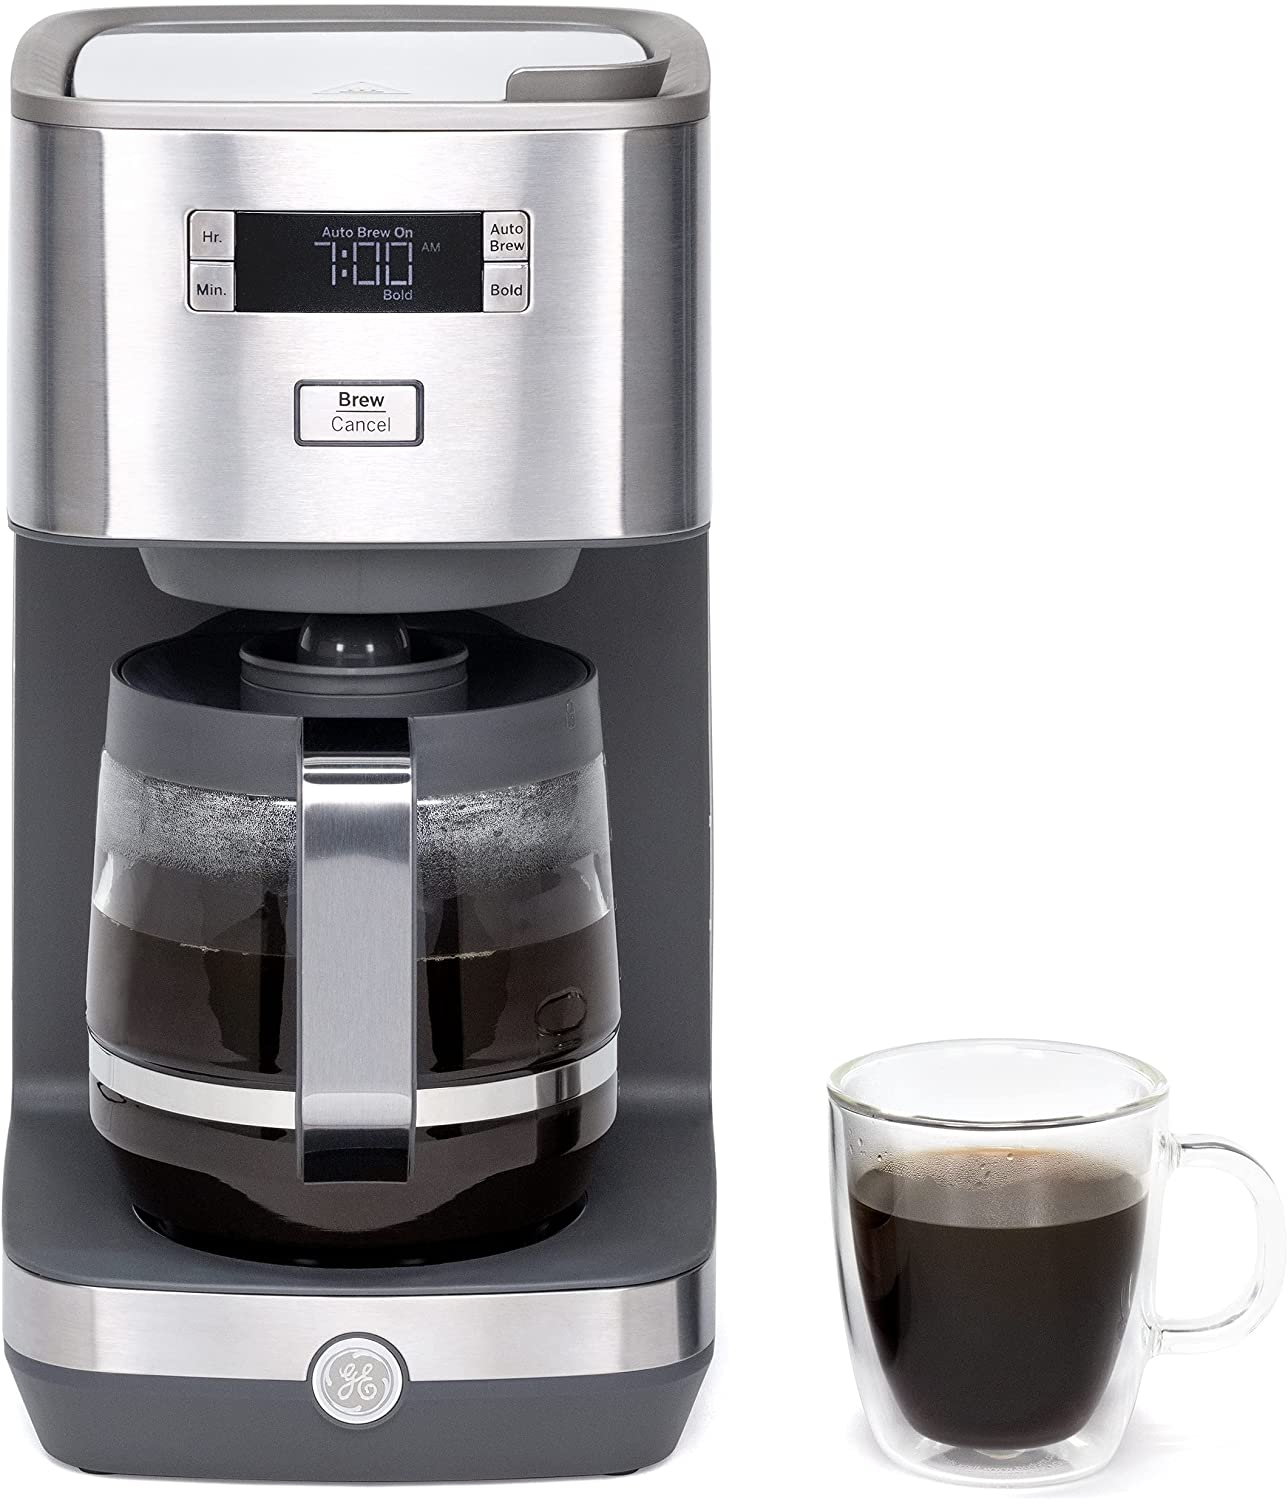 GE 12-Cup Drip Coffee Maker $29 + free s/h at Amazon